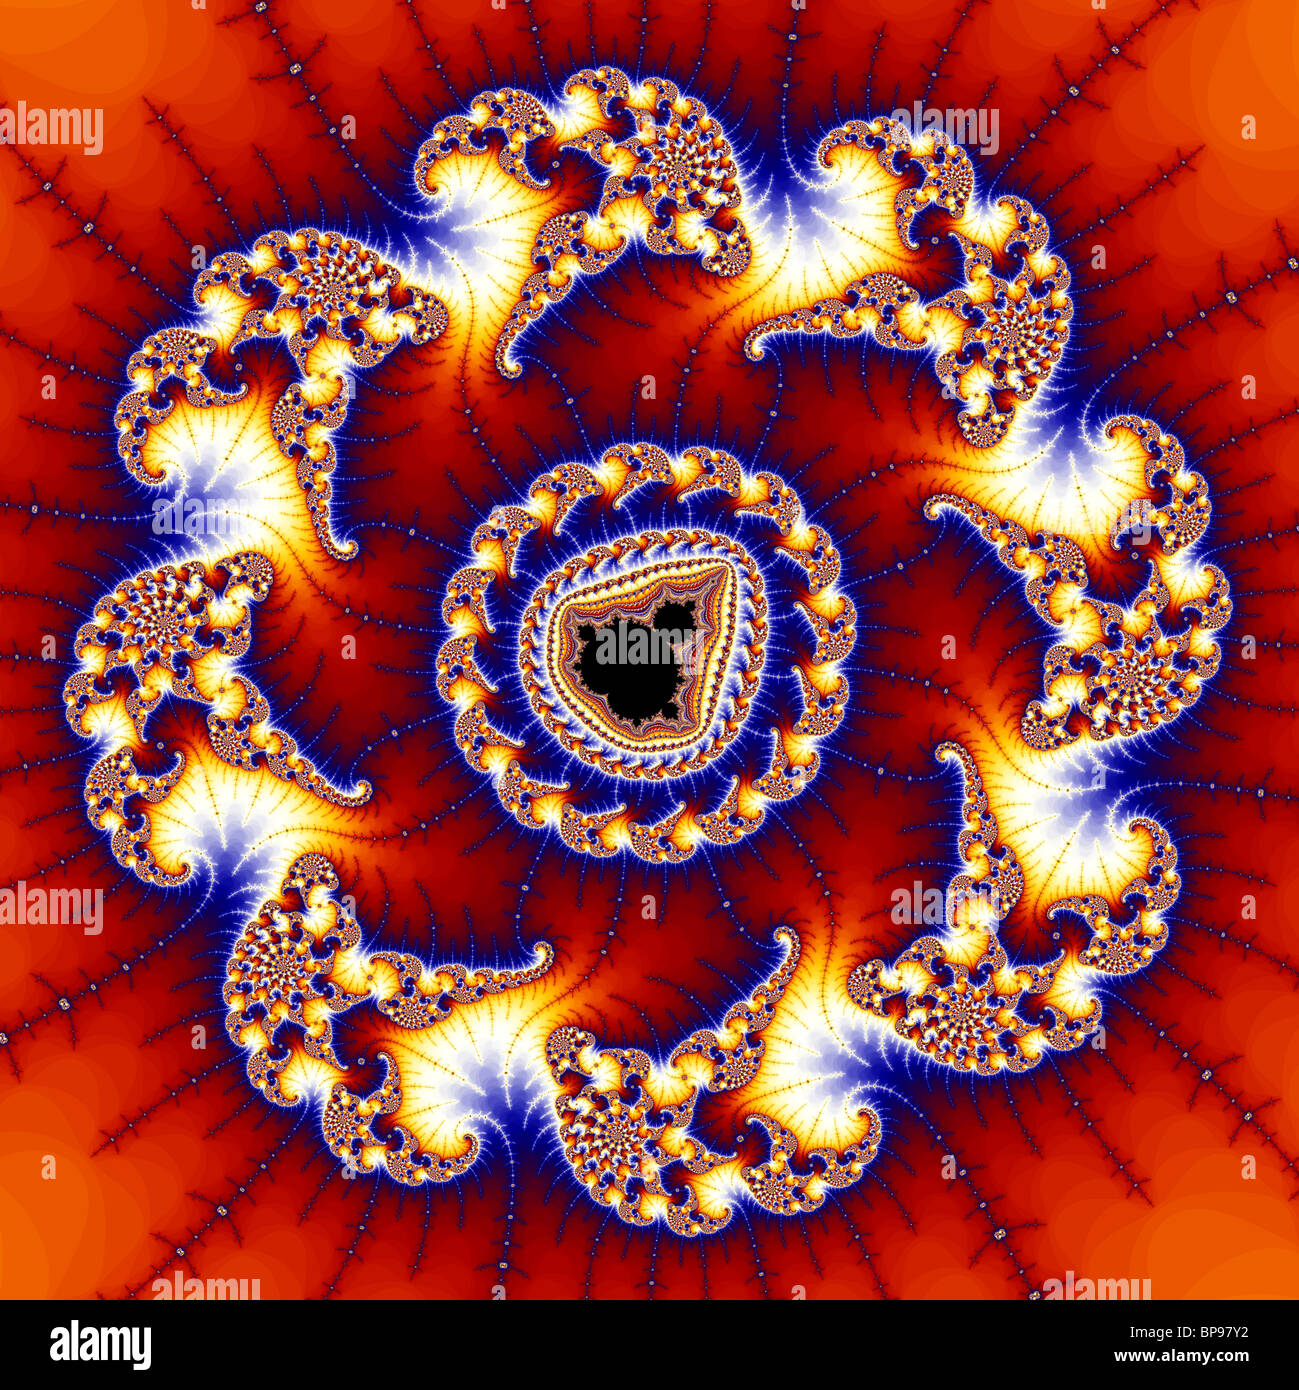 The Mandelbrot Set contains an infinite number of copies of itself ...